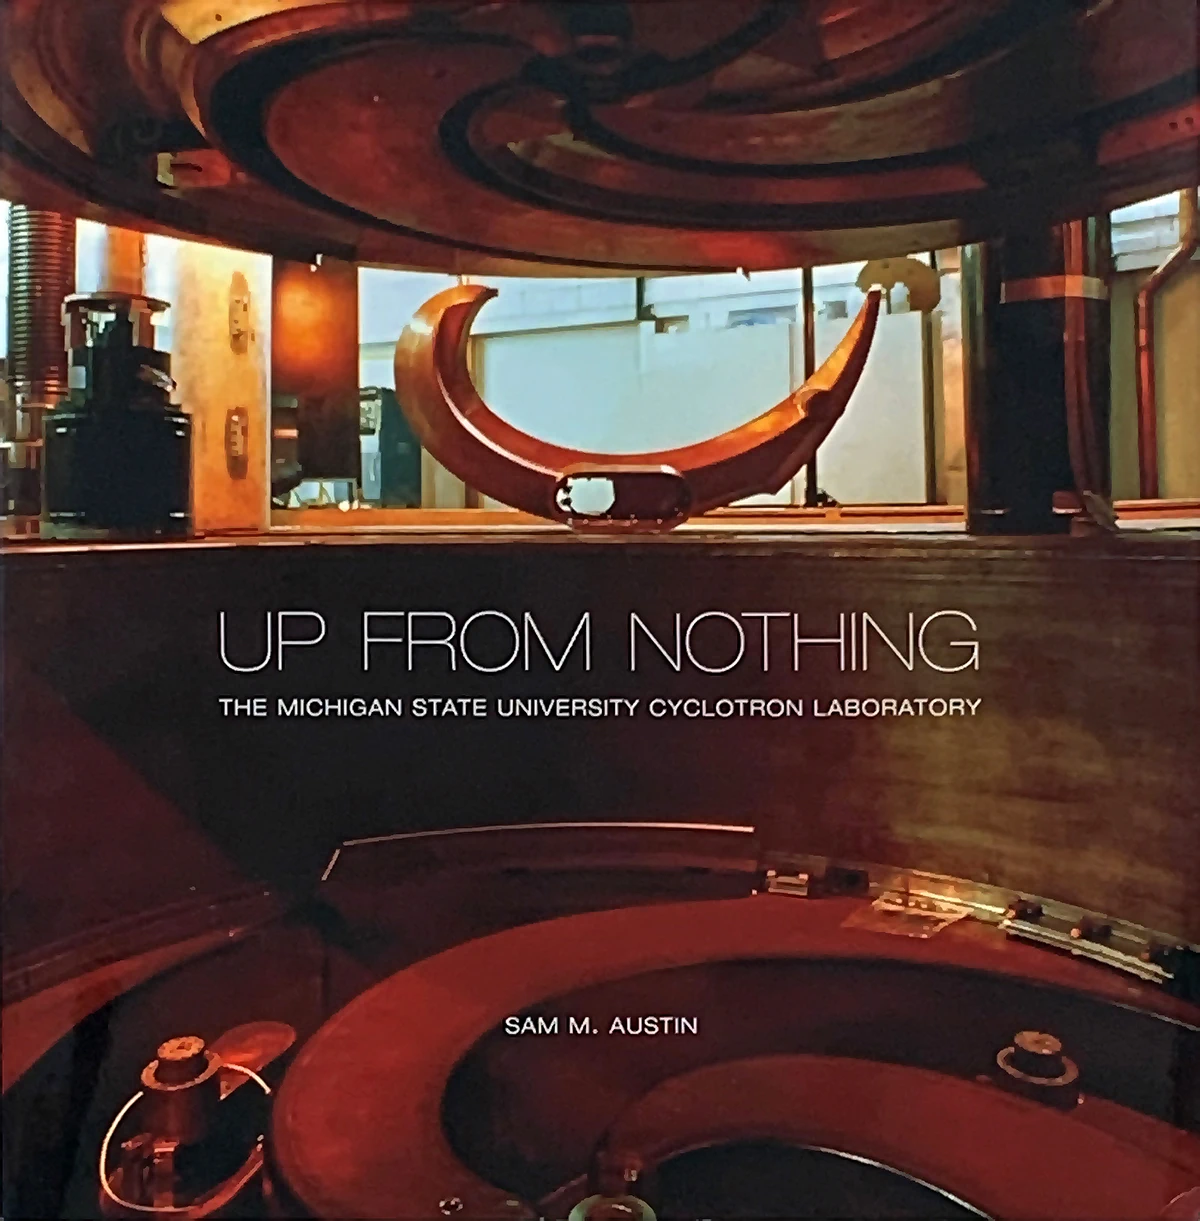 Sam Austin, University Distinguished Professor Emeritus in nuclear physics and former National Superconducting Cyclotron Laboratory Director, penned the 2016 book “Up from Nothing,” detailing accelerator-related research at MSU dating back to 1961.